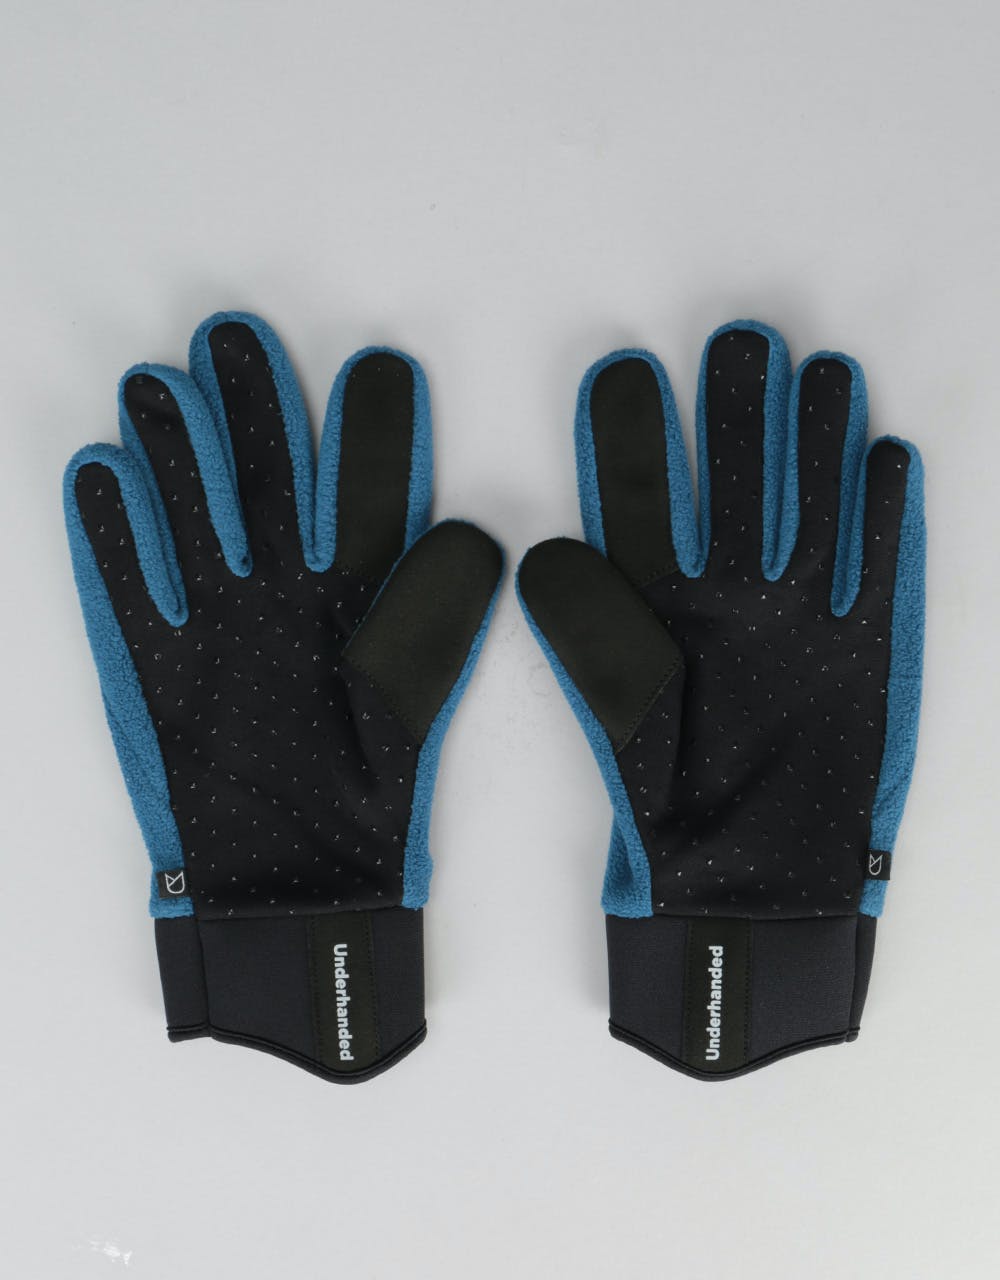 Underhanded Duo Touchscreen Gloves - Prussian Blue